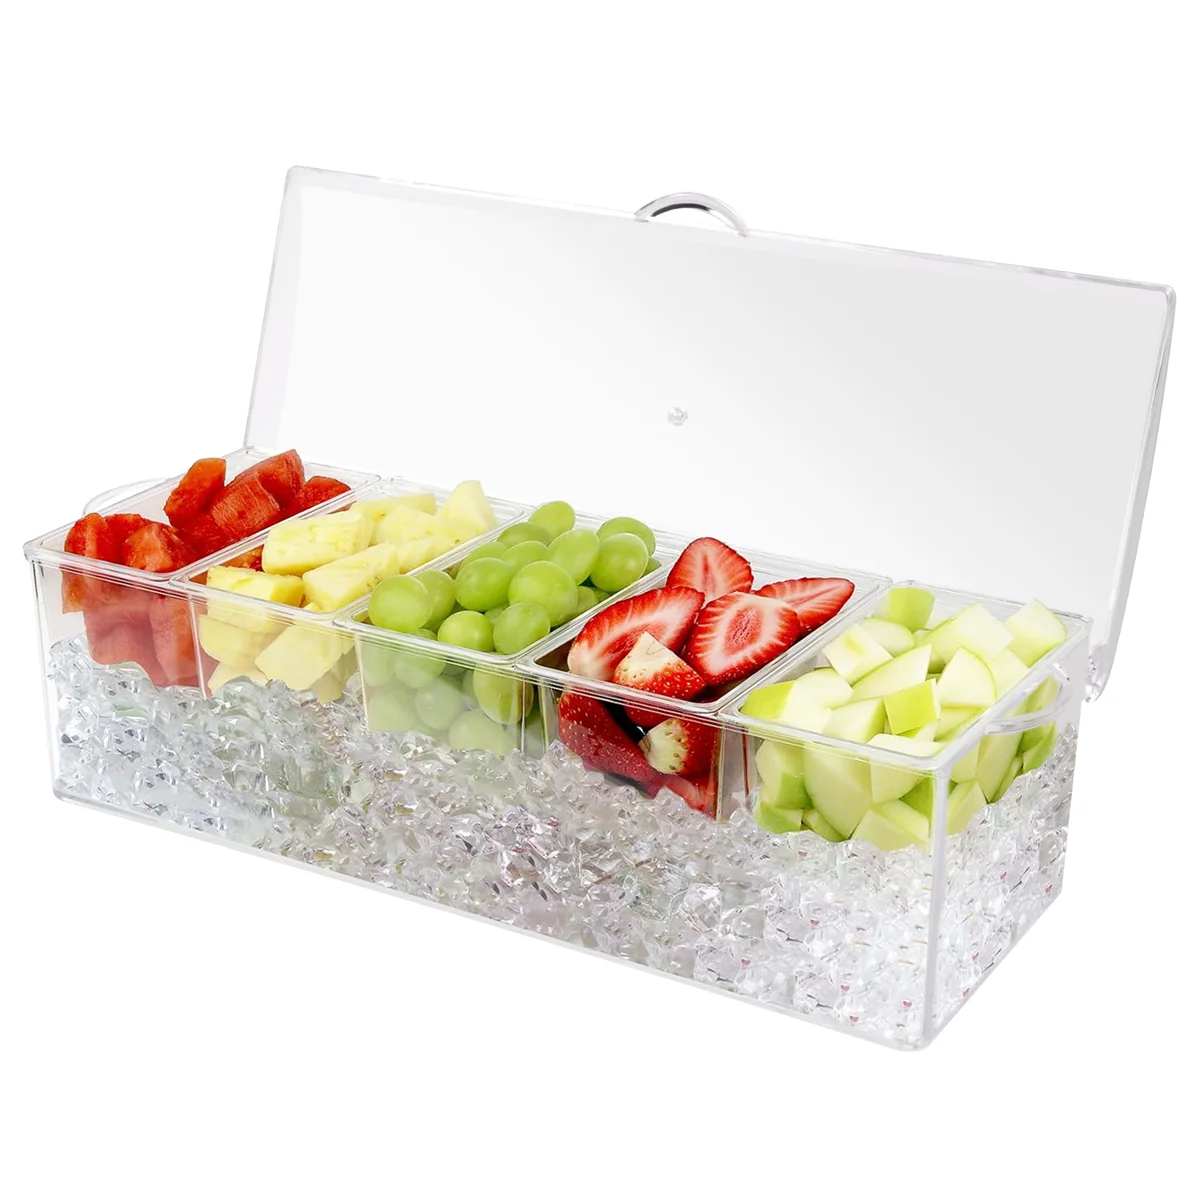 

Ice Cold 5 Compartment Condiment Server Rack-Service Tray Container with 5 Removable Trays